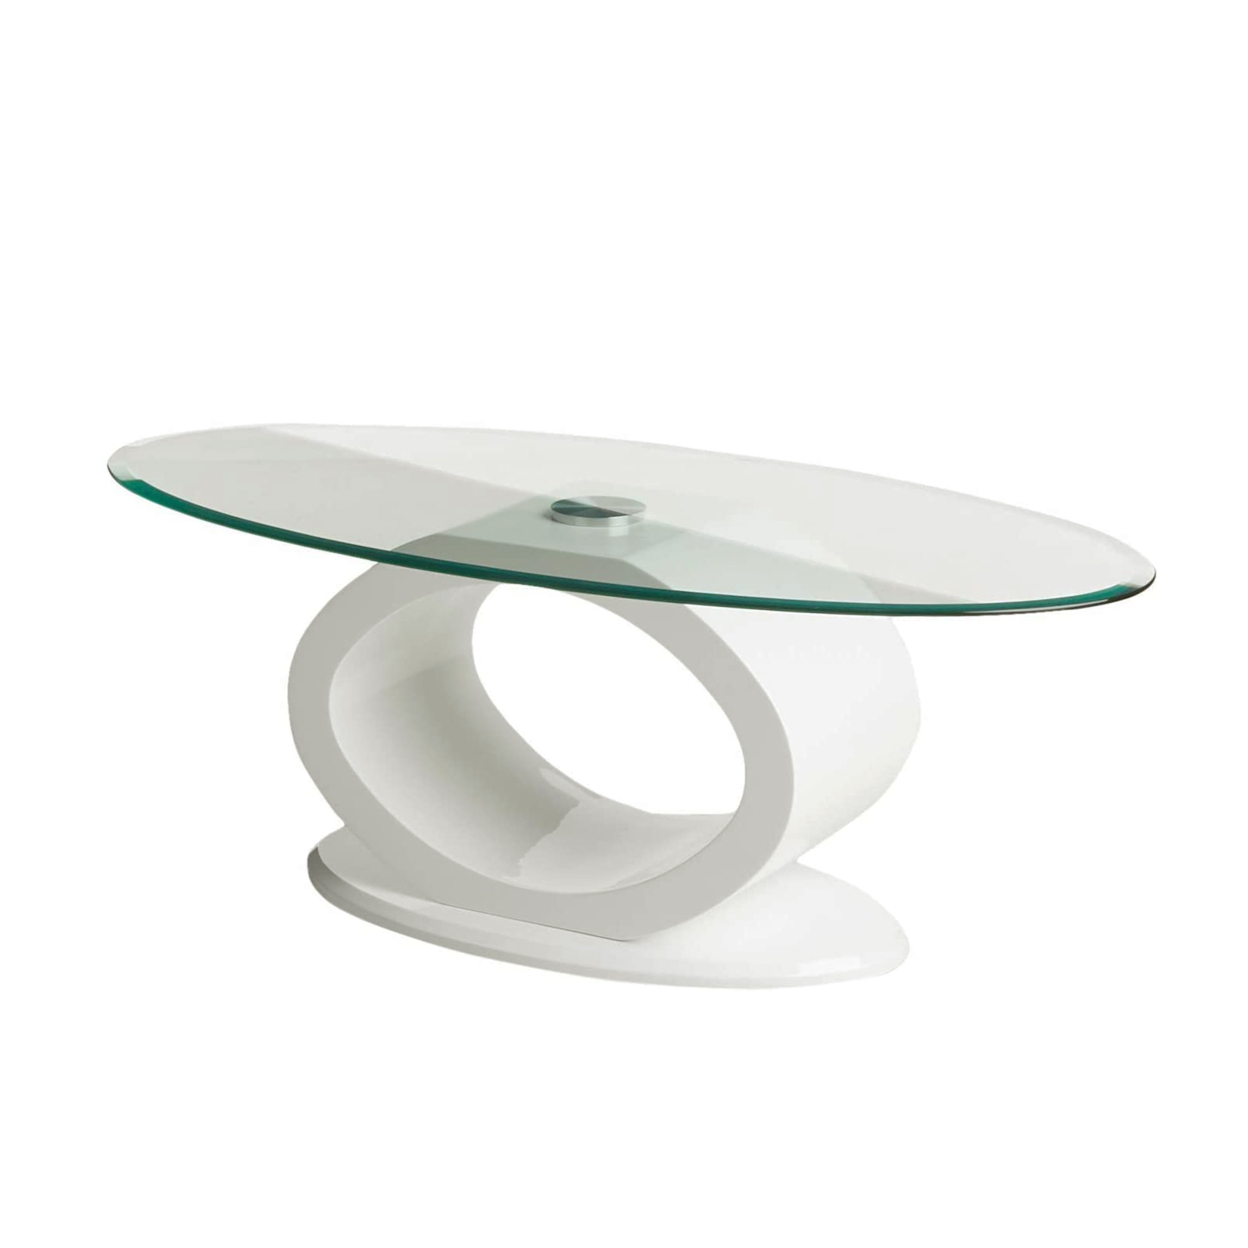 Contemporary Tempered Glass Top Coffee Table With O Shape Base, White- Saltoro Sherpi